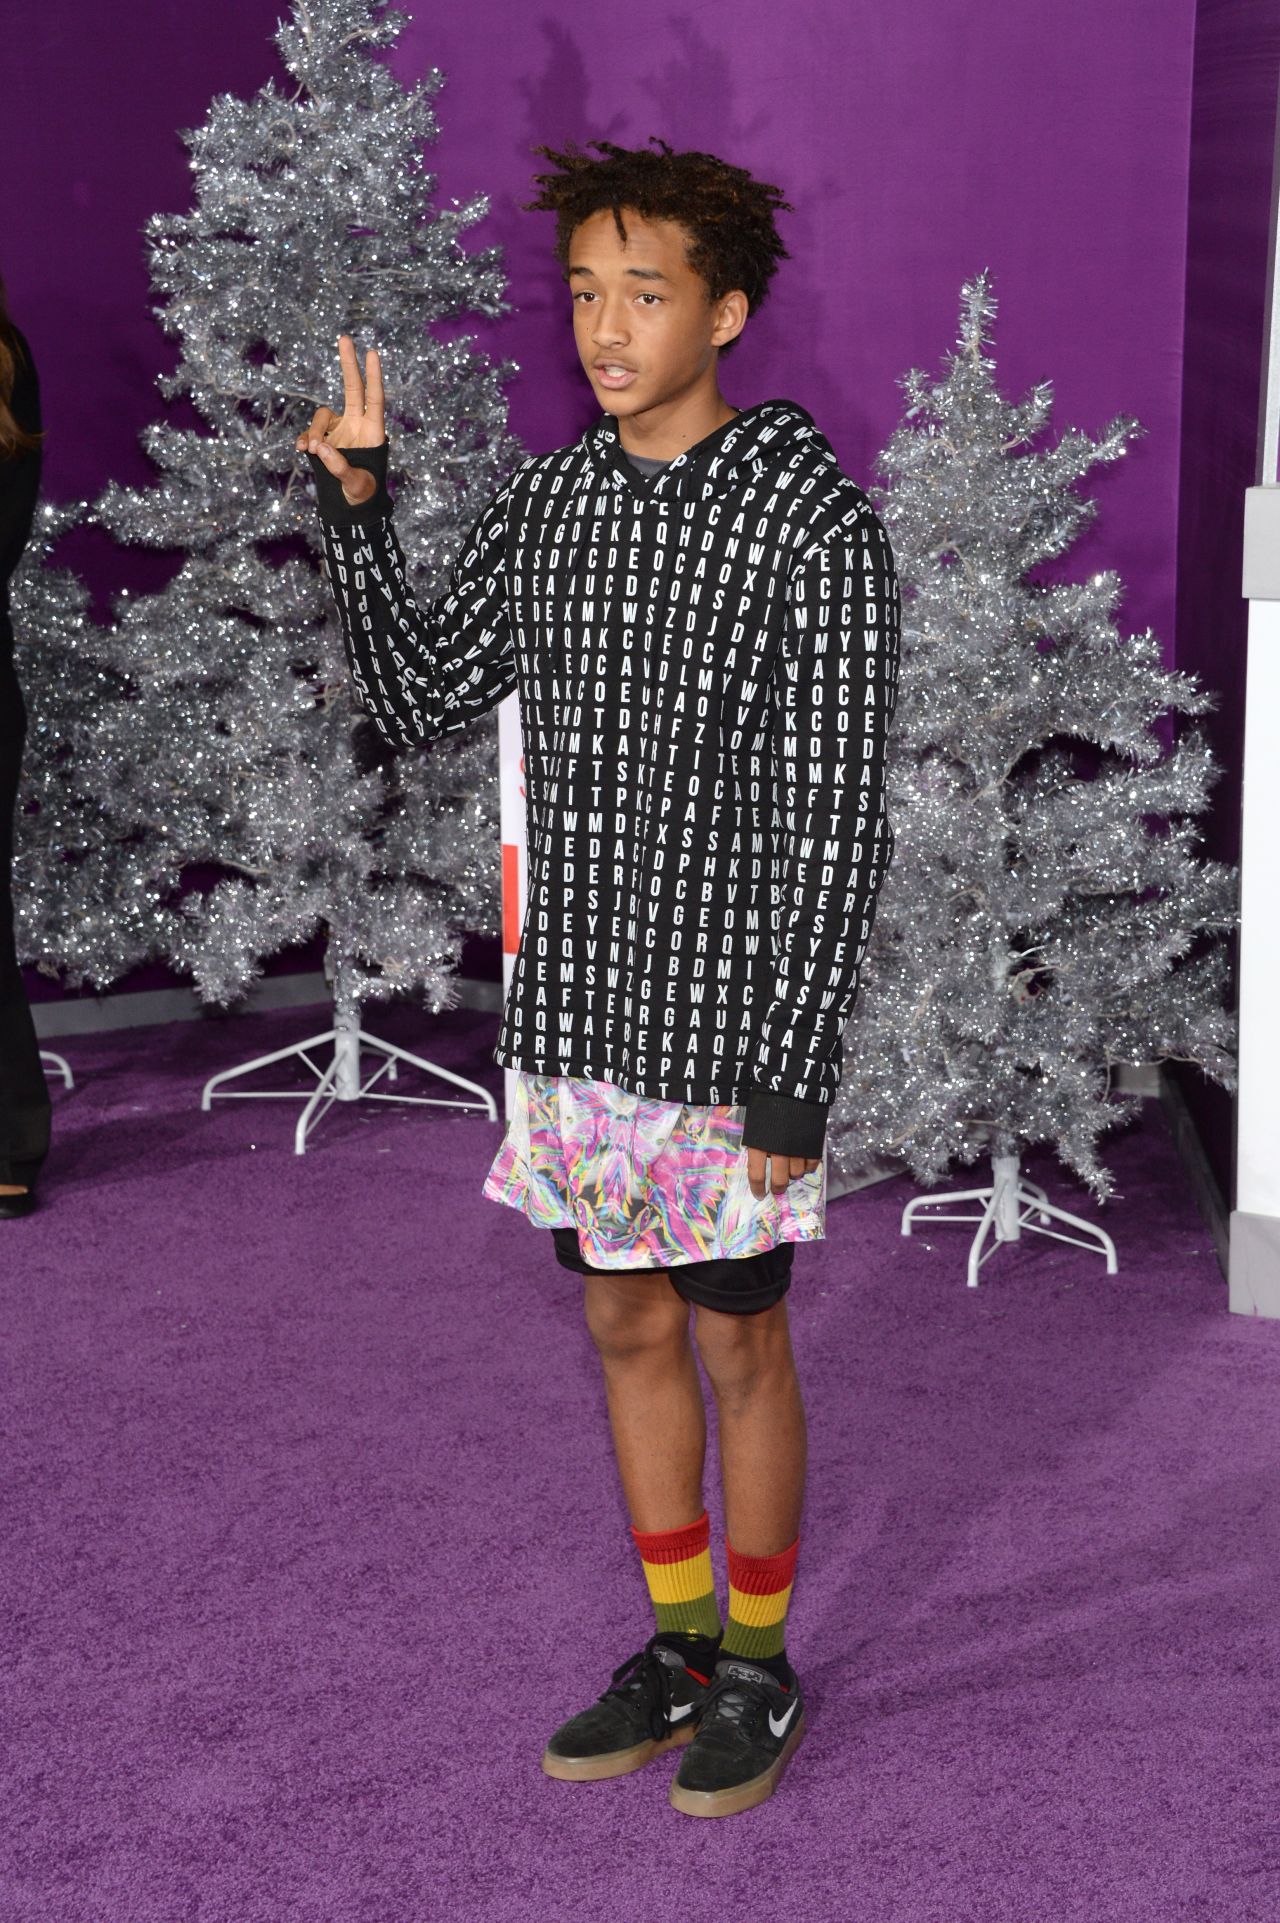 Justin Bieber's pal Jaden Smith arrives showing support and peace at the December 18 premiere of Bieber's "Believe" movie.